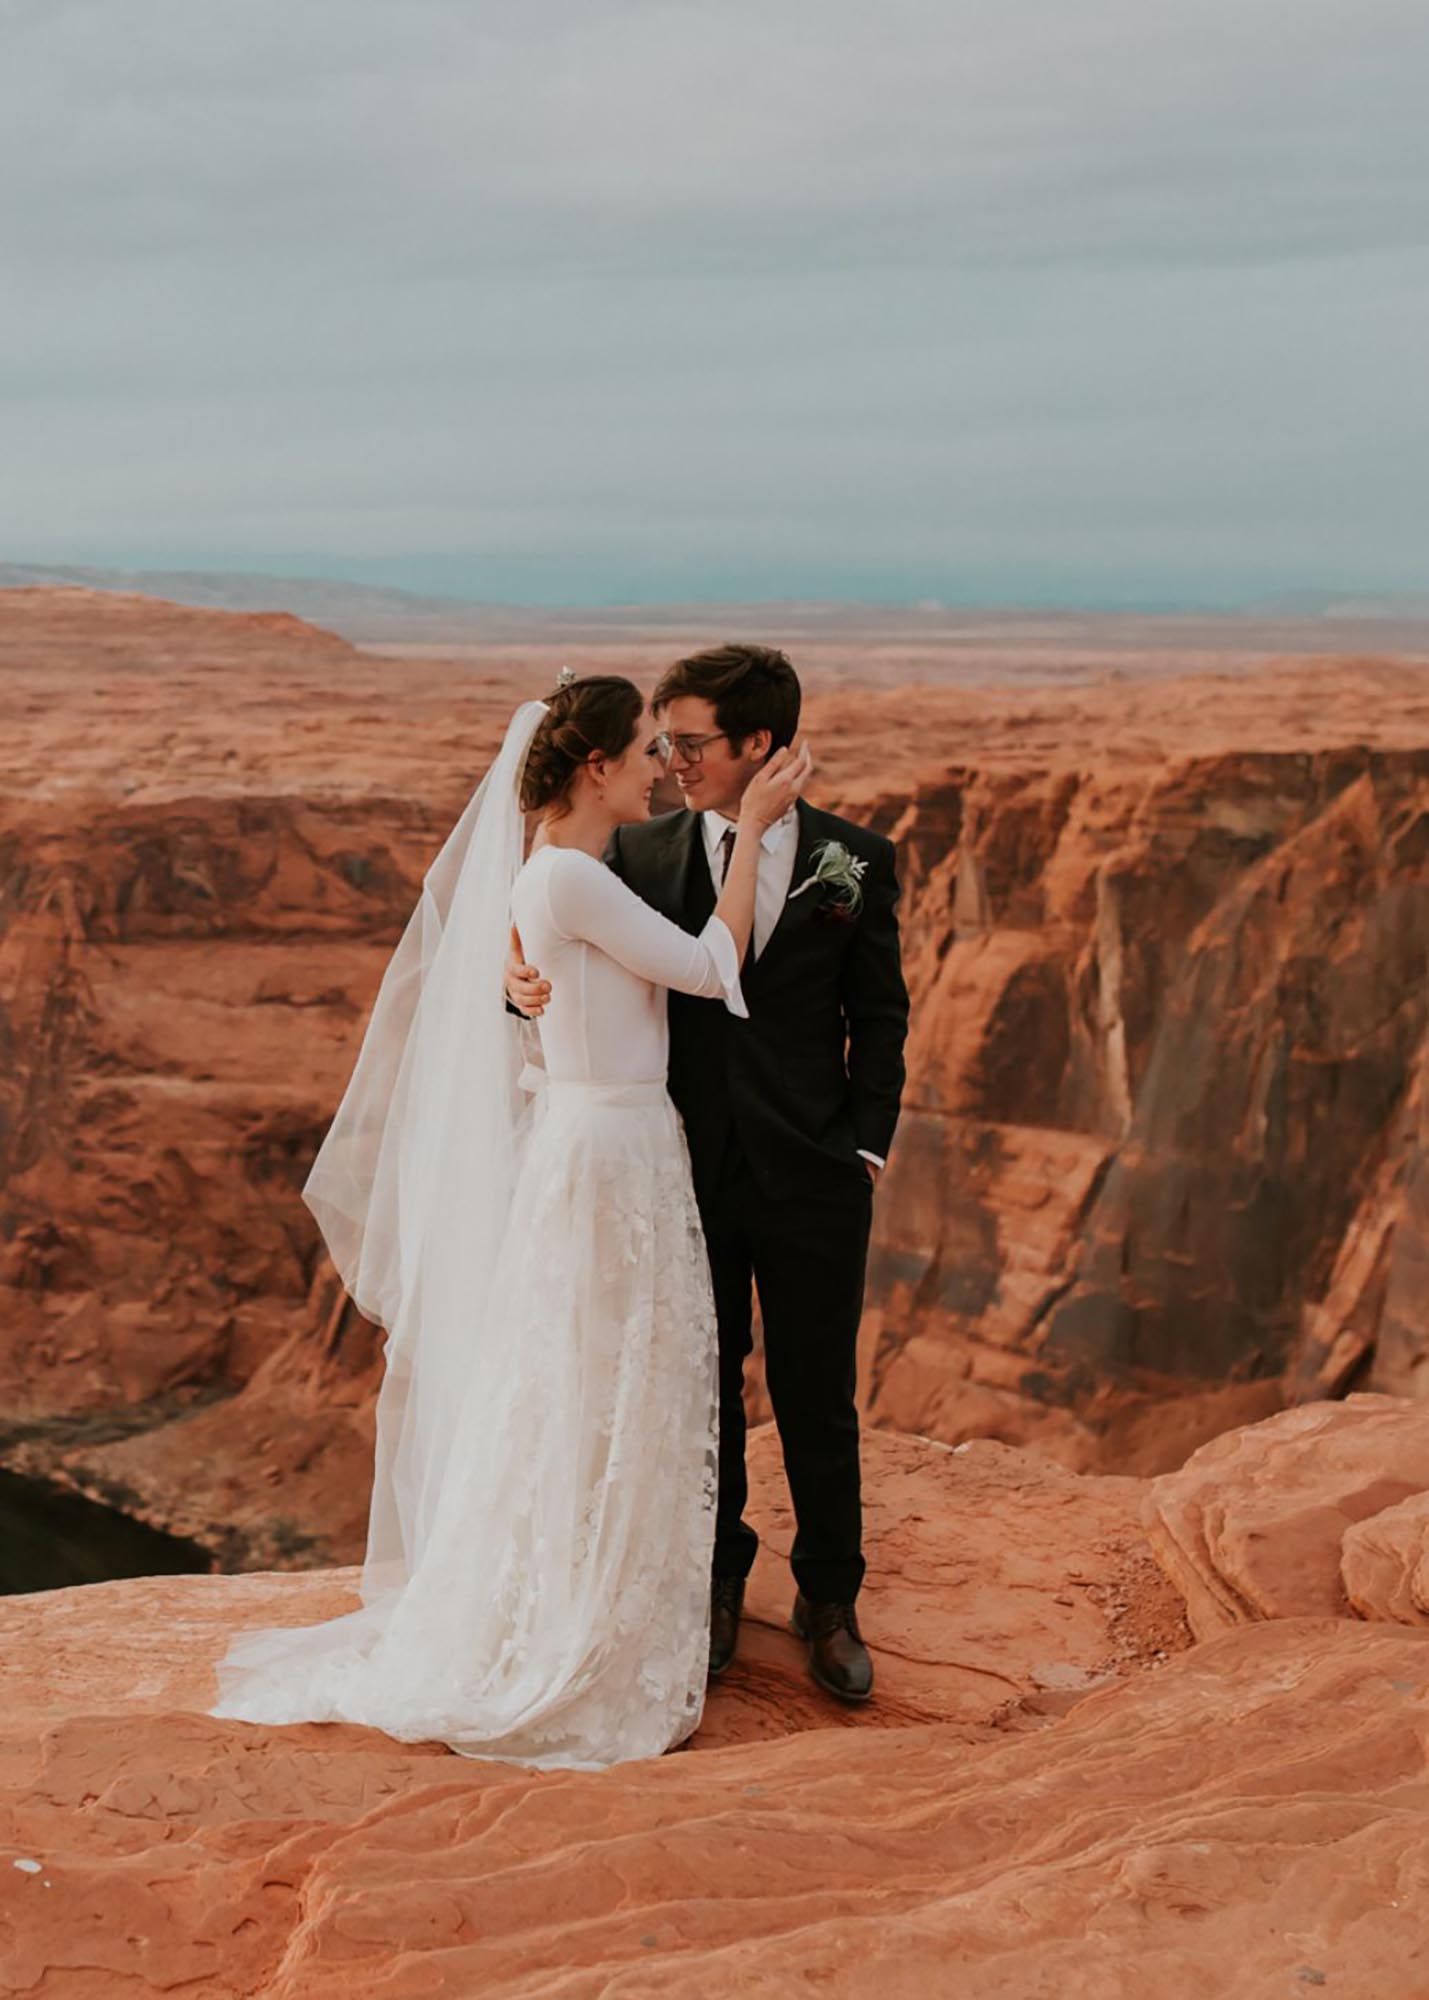 photo of a groom wearing a charcoal suit and bride wearing a wedding dress with the grand canyon in the background